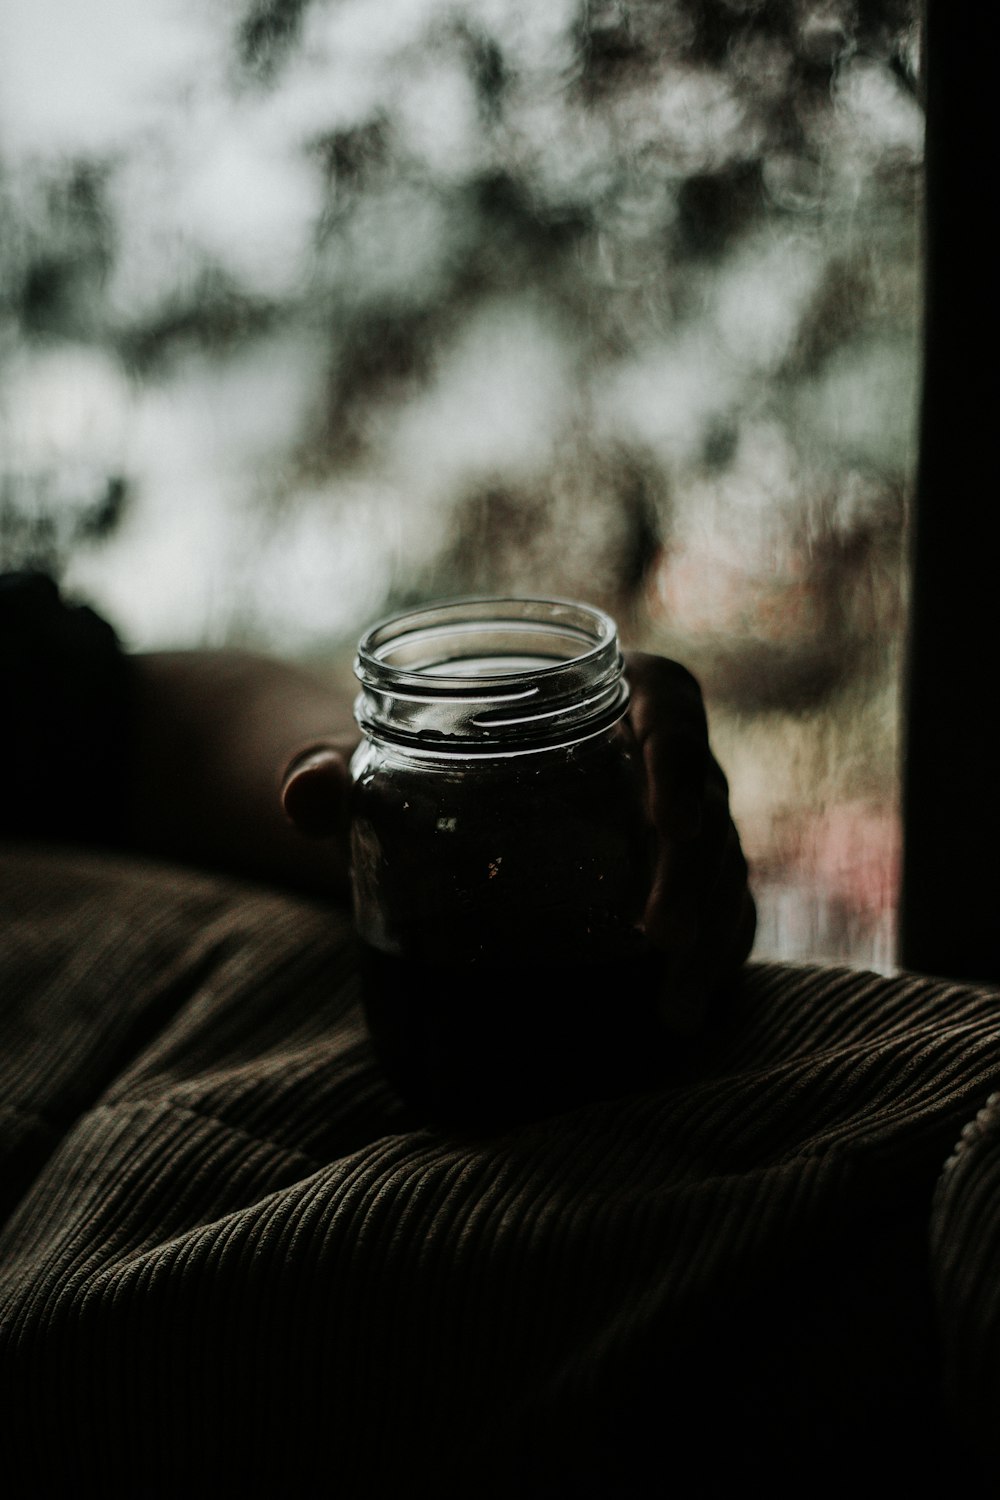 person holding glass jar